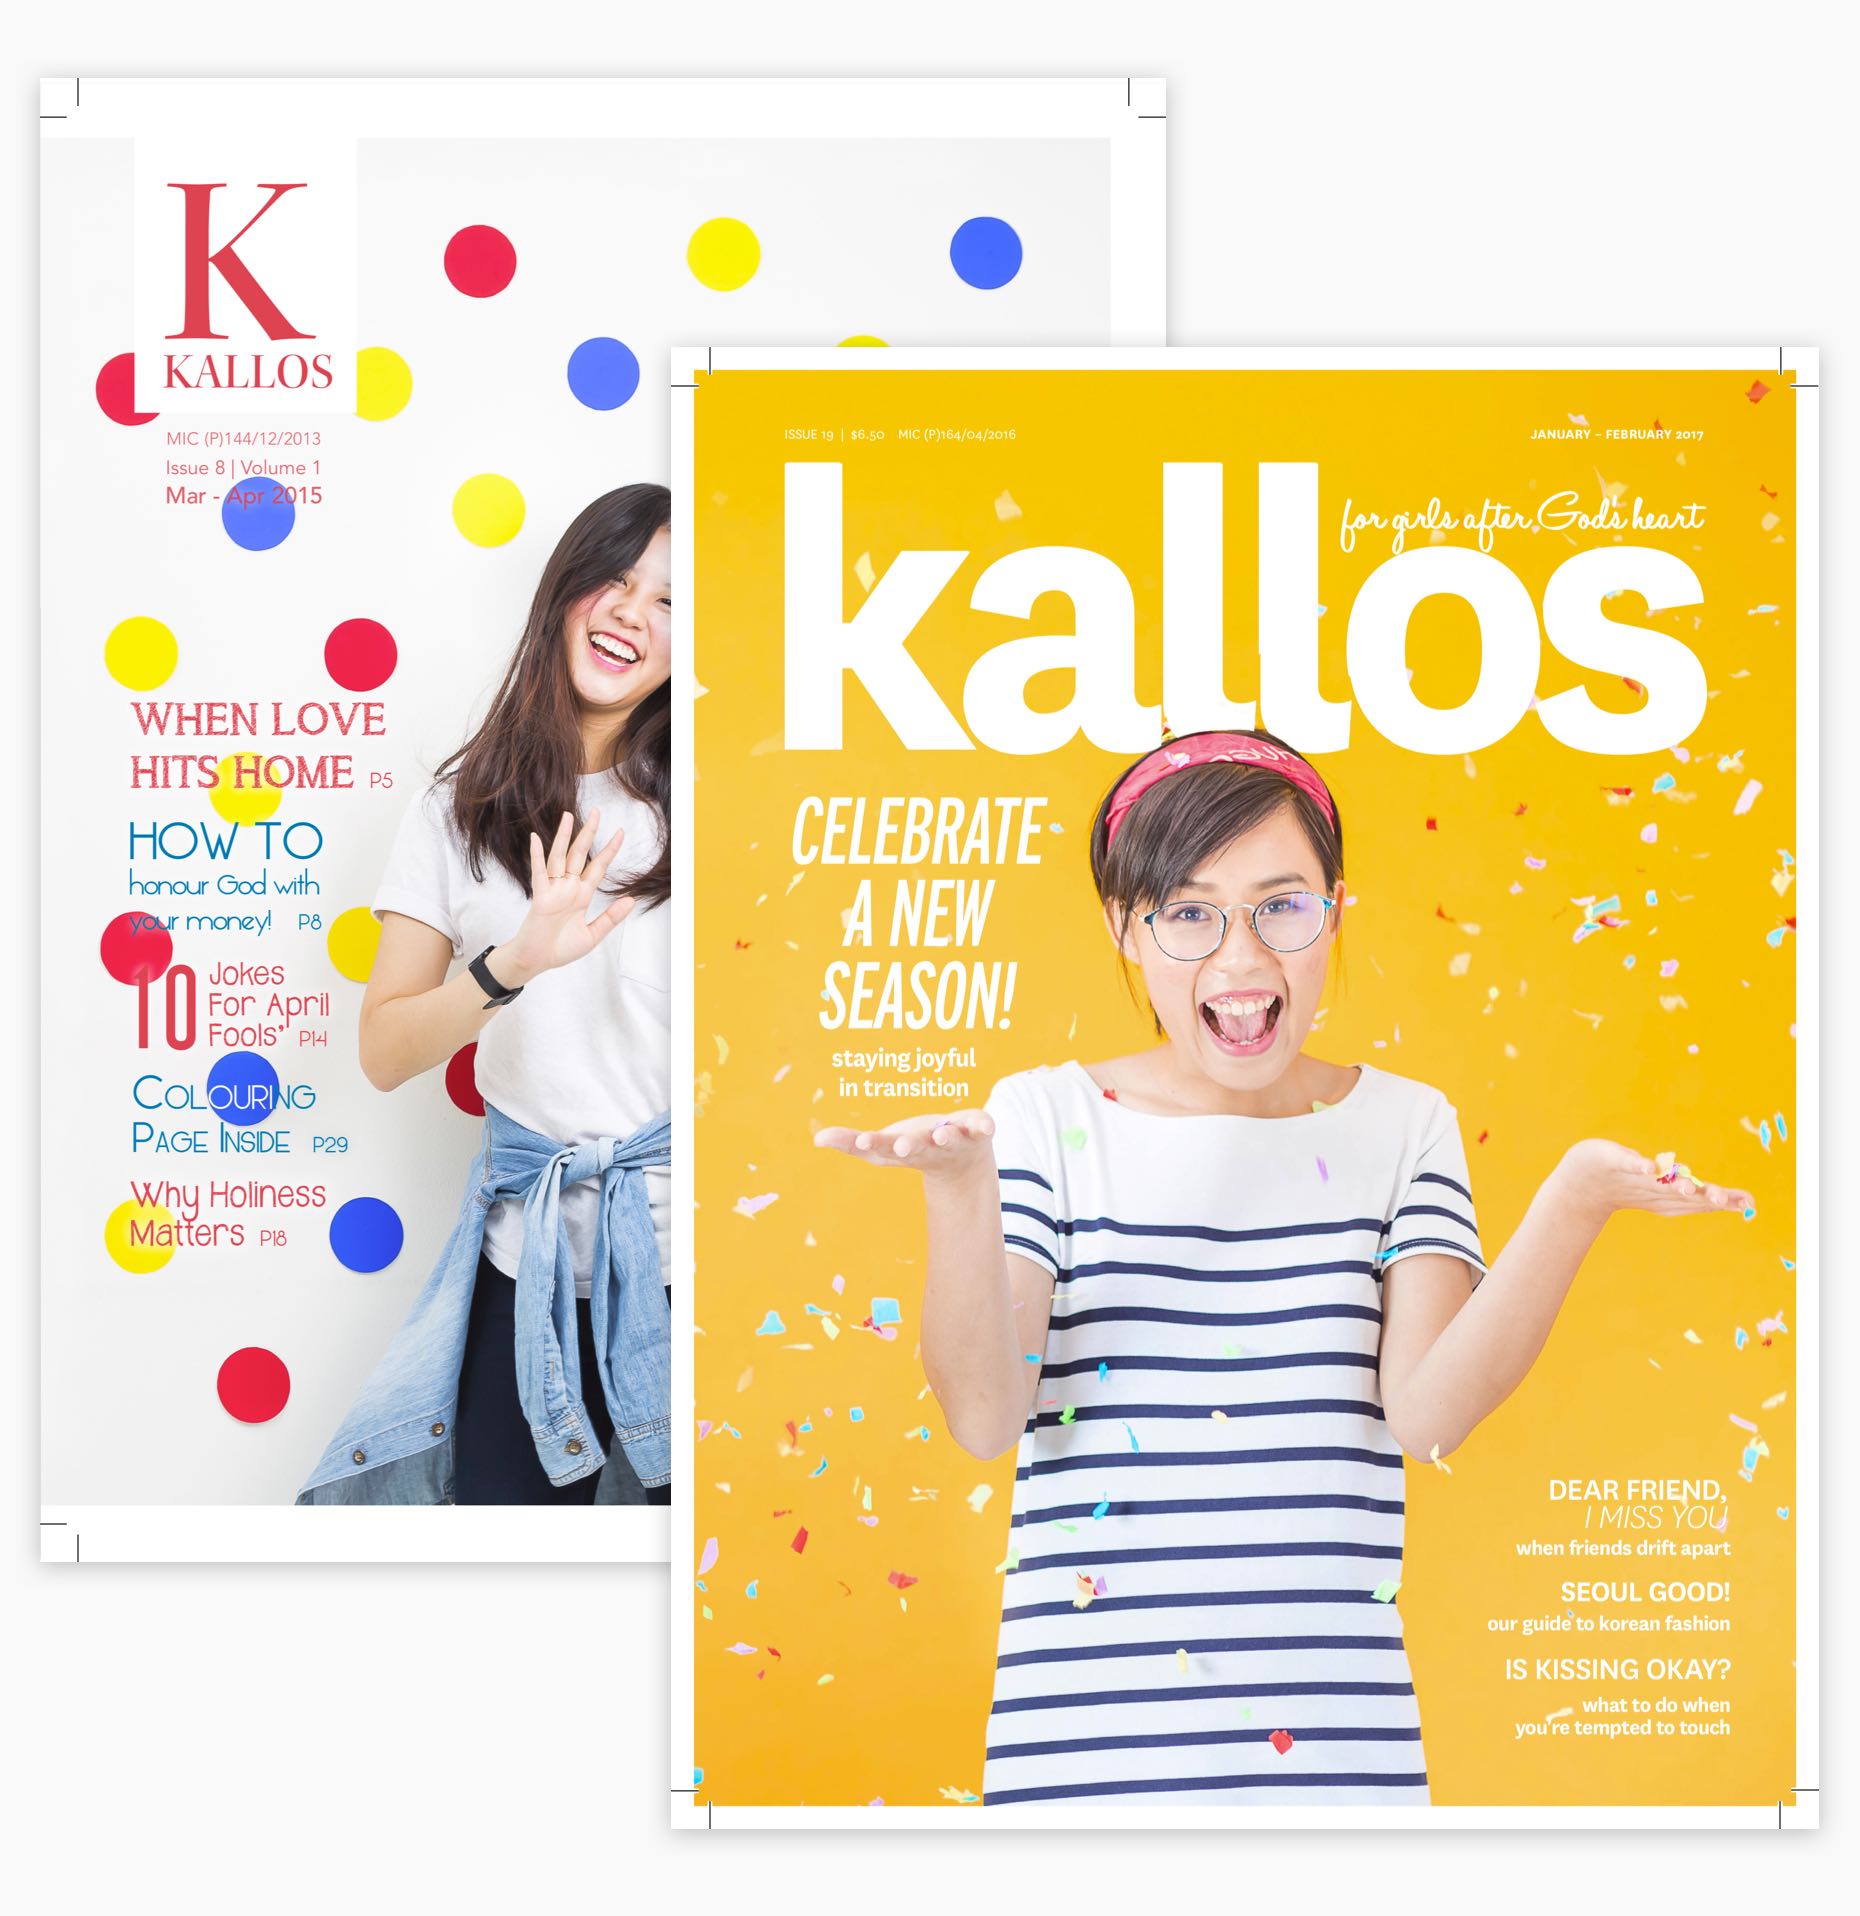 The magazine cover, before and after rebranding.